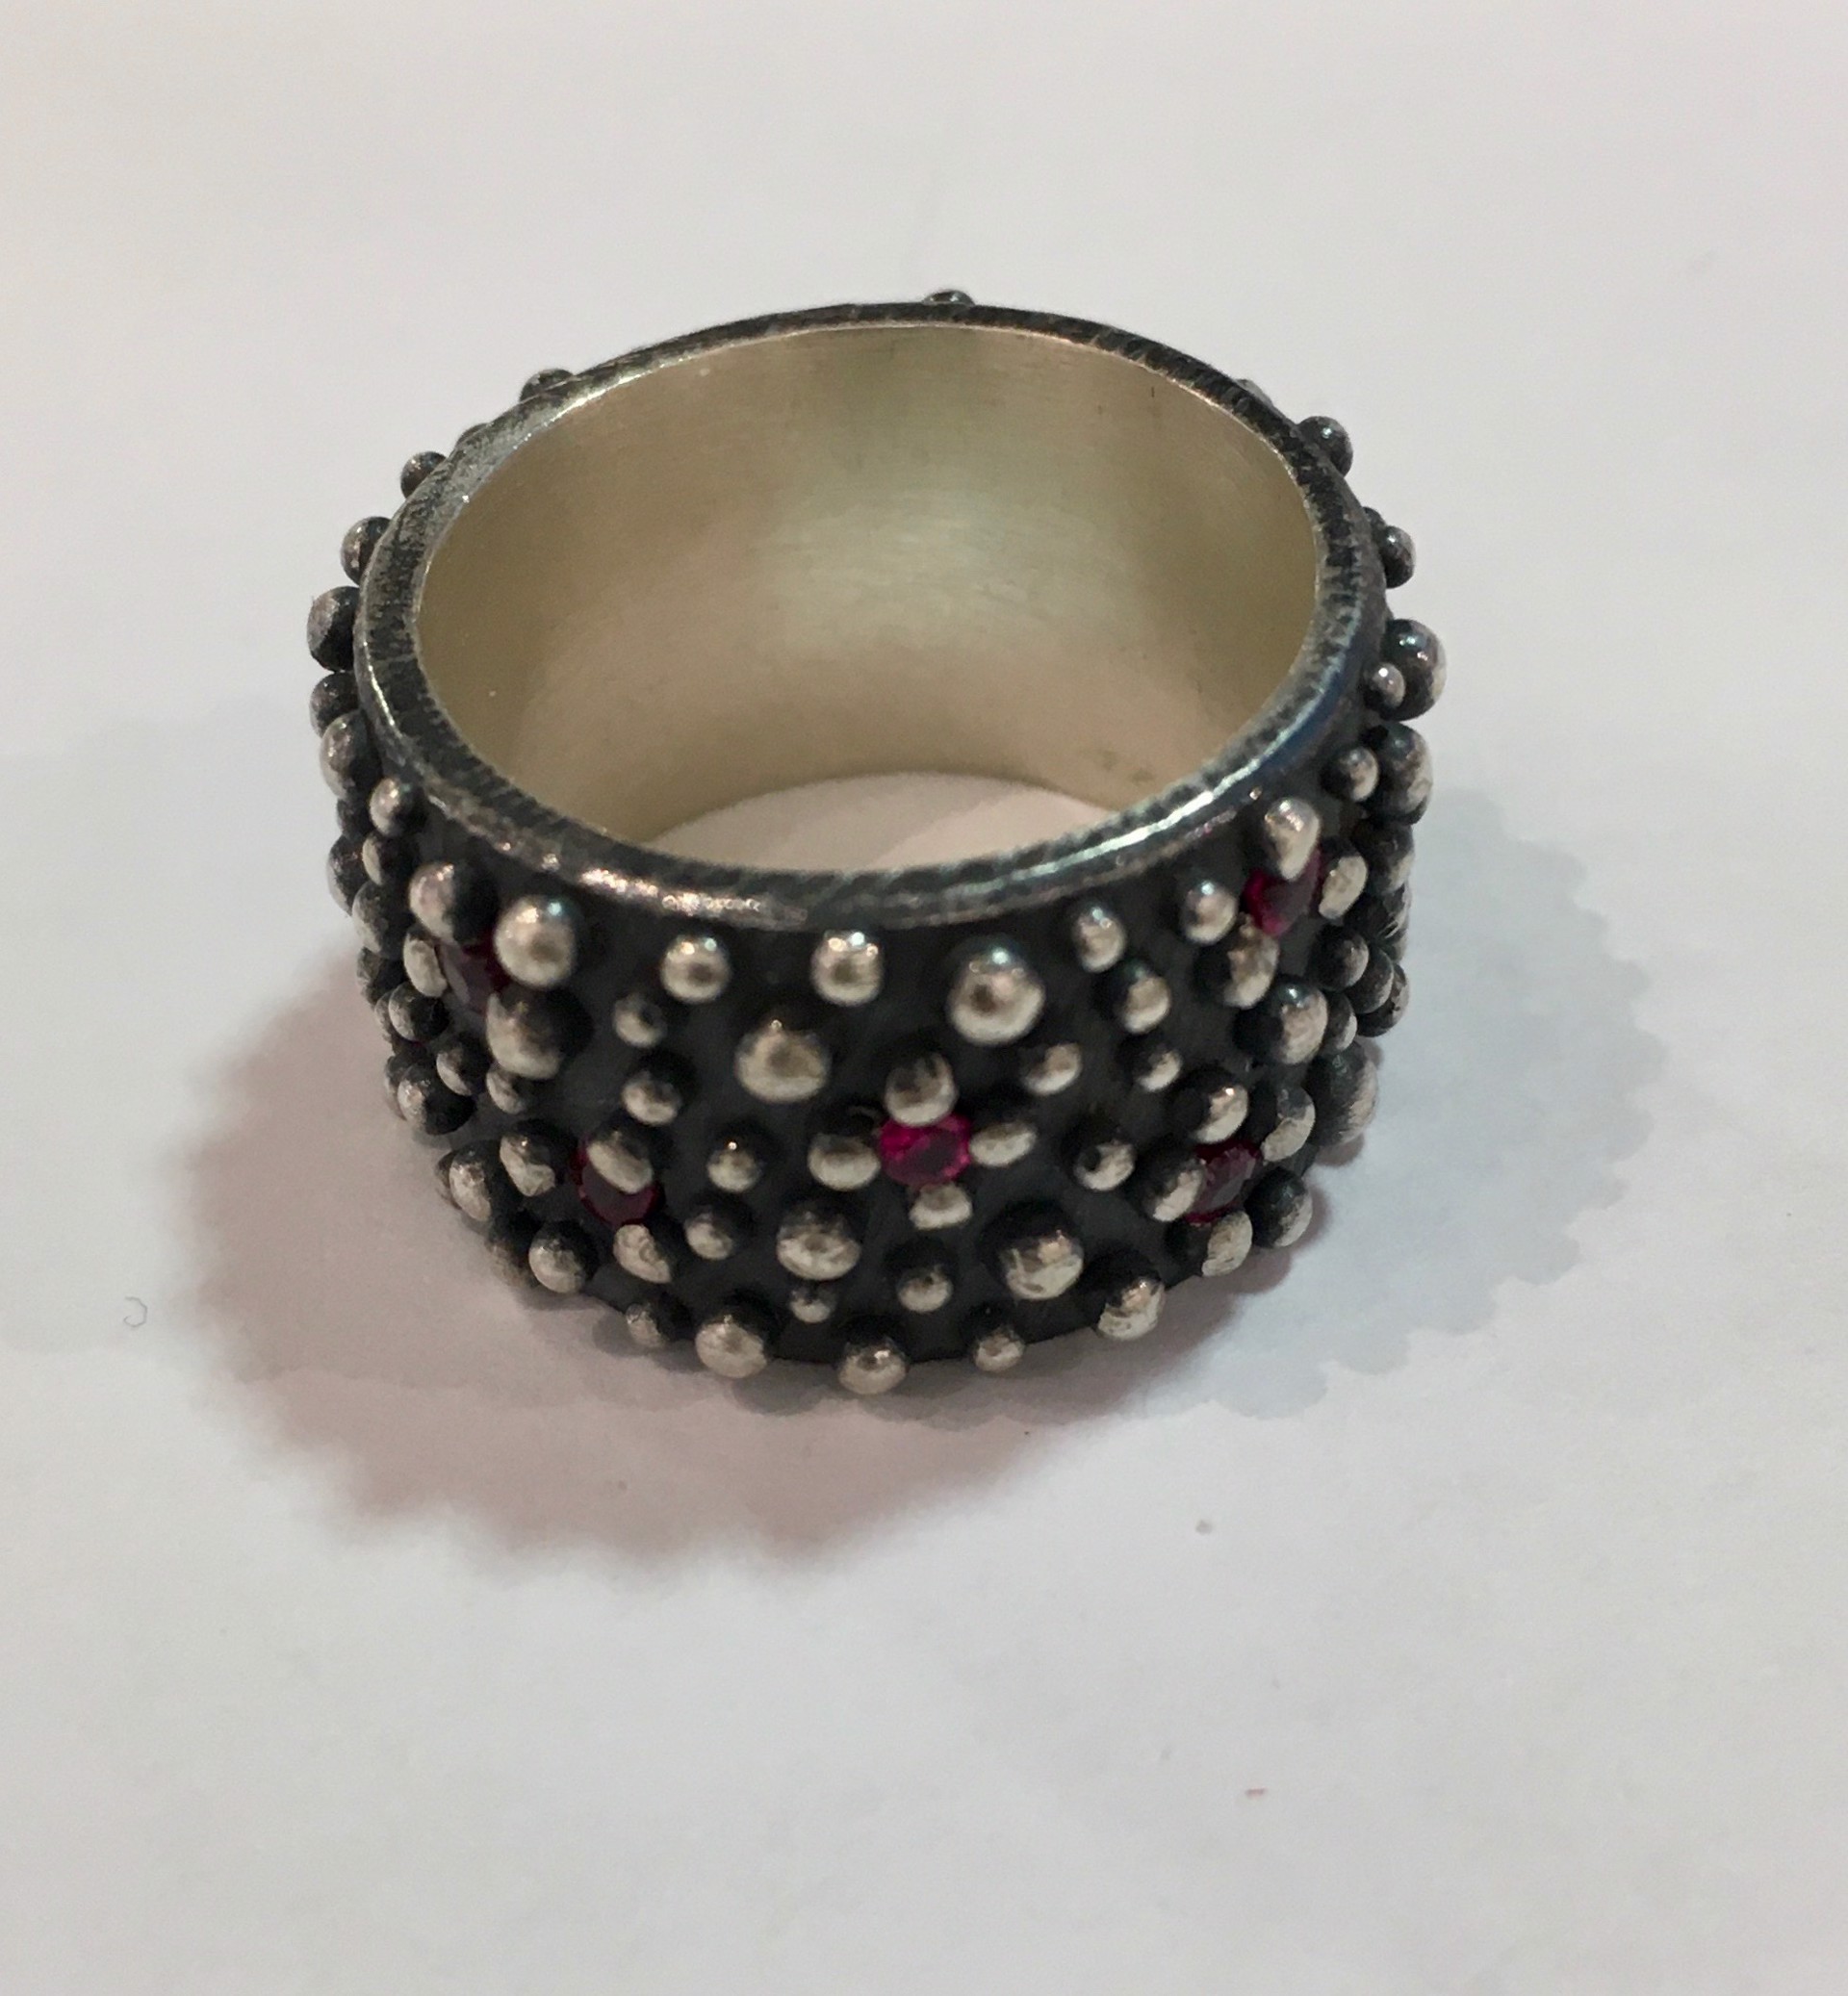 Oxidized Silver Band Wide with Rubies by DAHLIA KANNER